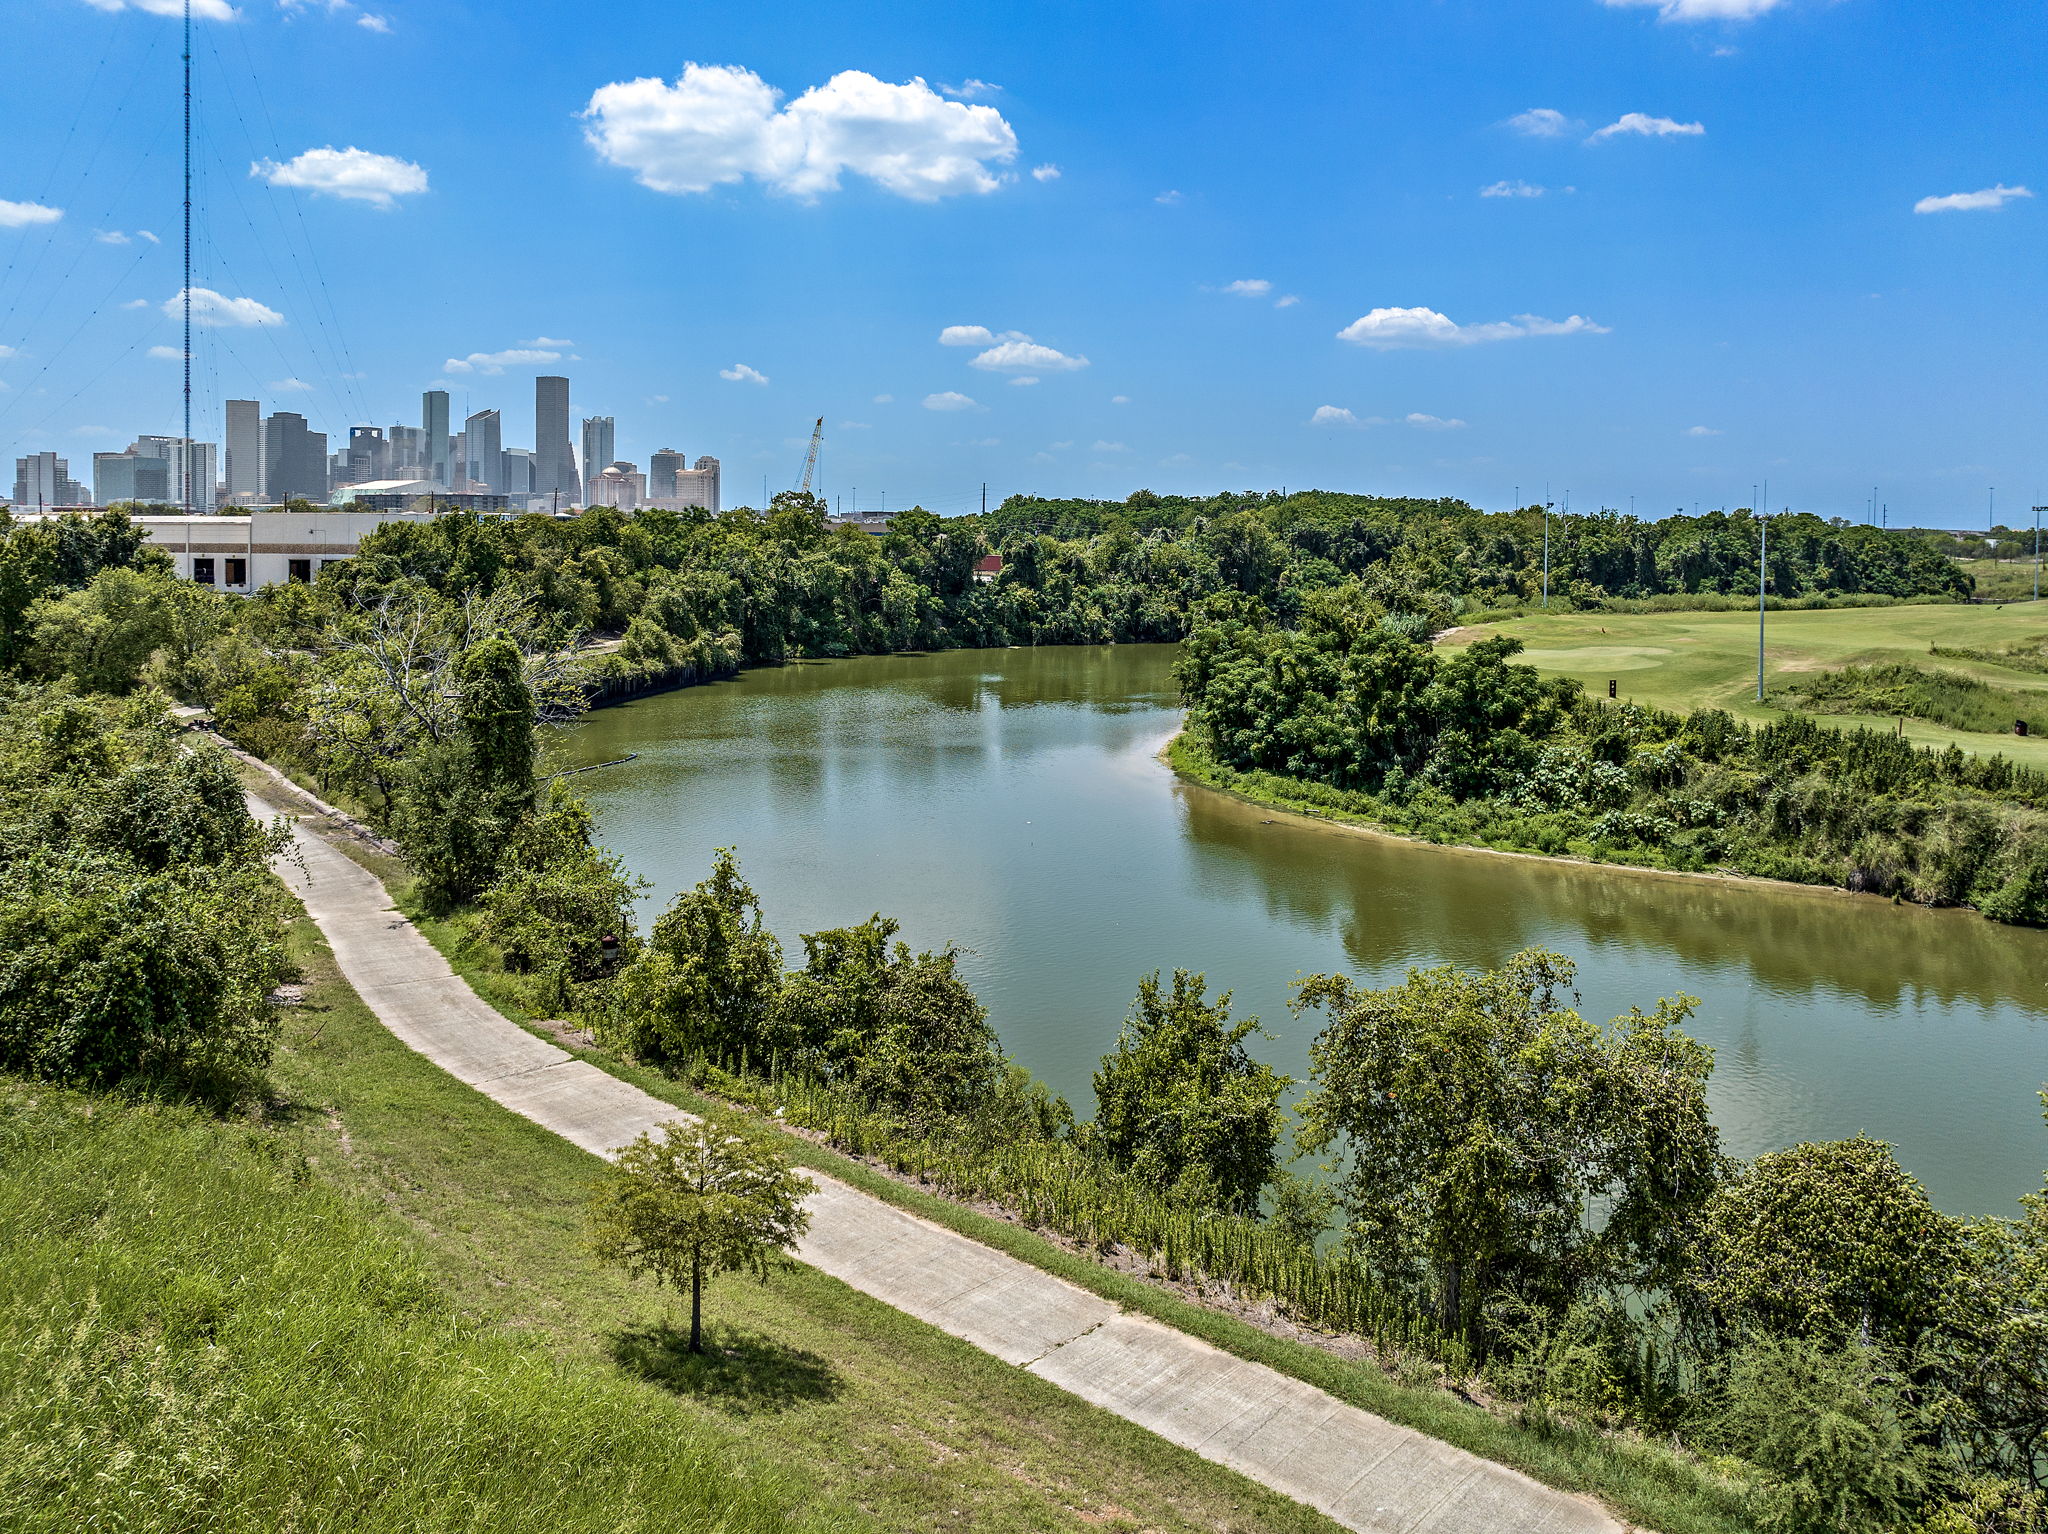 Winding paths in the Buffalo Bayou with a view of East River 9 on the other side